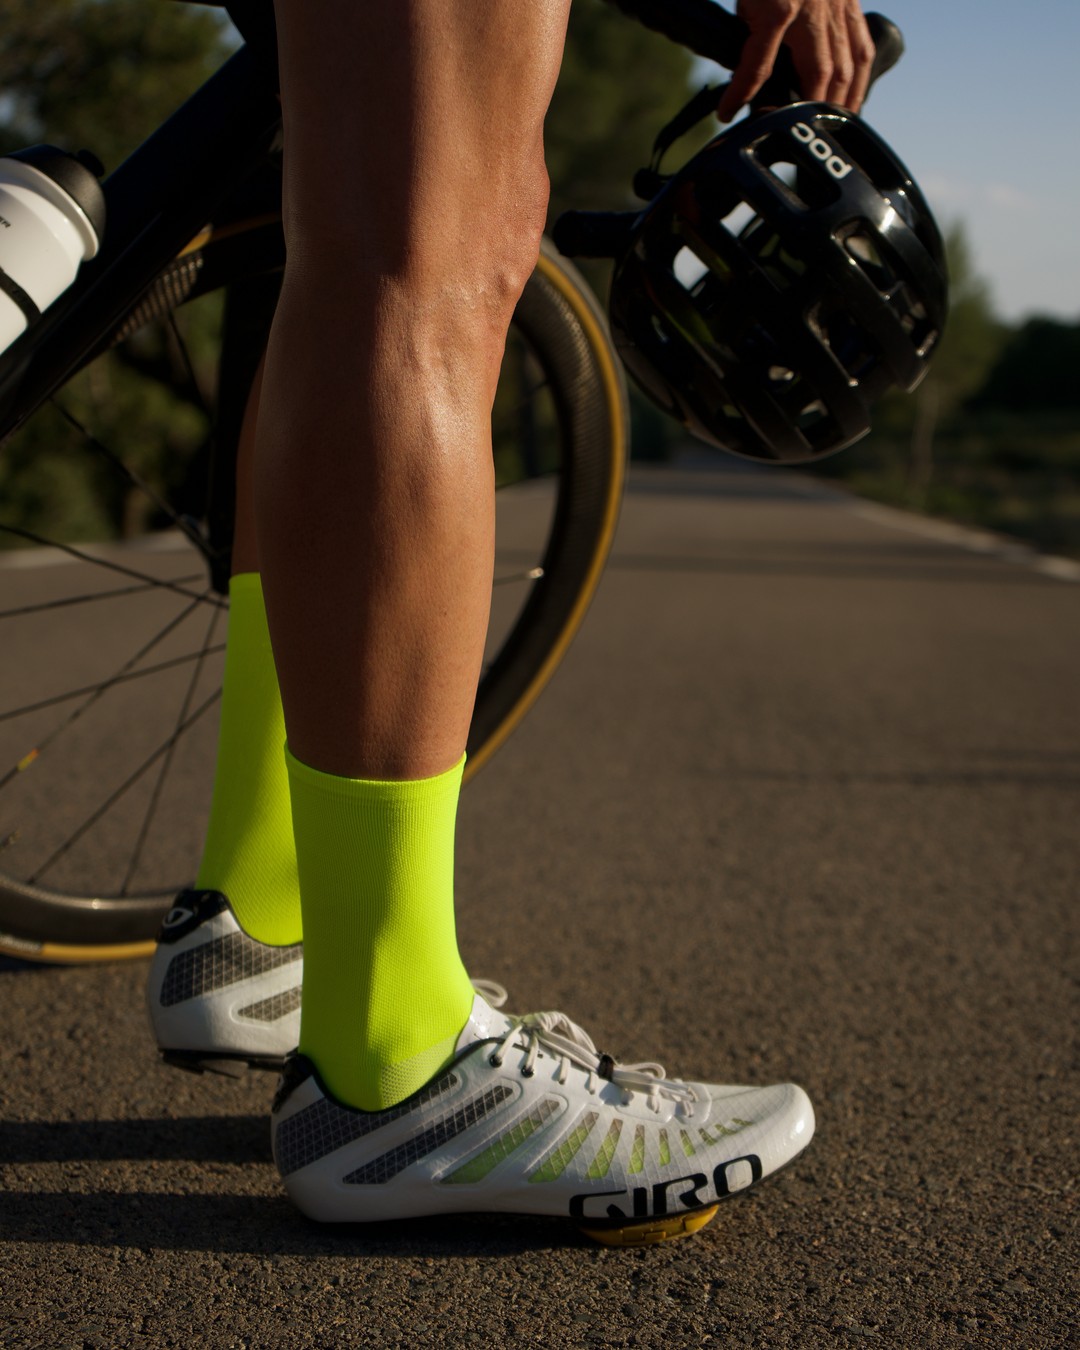 Fluo yellow cycling socks are made of special light-reflecting yarn. These aren’t just yellow socks. We went a step further and used a special polypropylene that makes you visible. In addition to safety, fluo yellow is still a very popular color among many cycling brands. It will certainly be a great addition to every cyclist’s wardrobe.

#cyclingapparel
#cyclingshots
#cyclingstyle
#cyclingsocks
#sockgame
#sockdoping
#cyclingfashion
#cycling
#whitecyclingsocks
#cyclingaccessories
#cyclingkit
#sockgamestrong
#whitesocks
#bluesocks
#womenscycling
#runningsocks